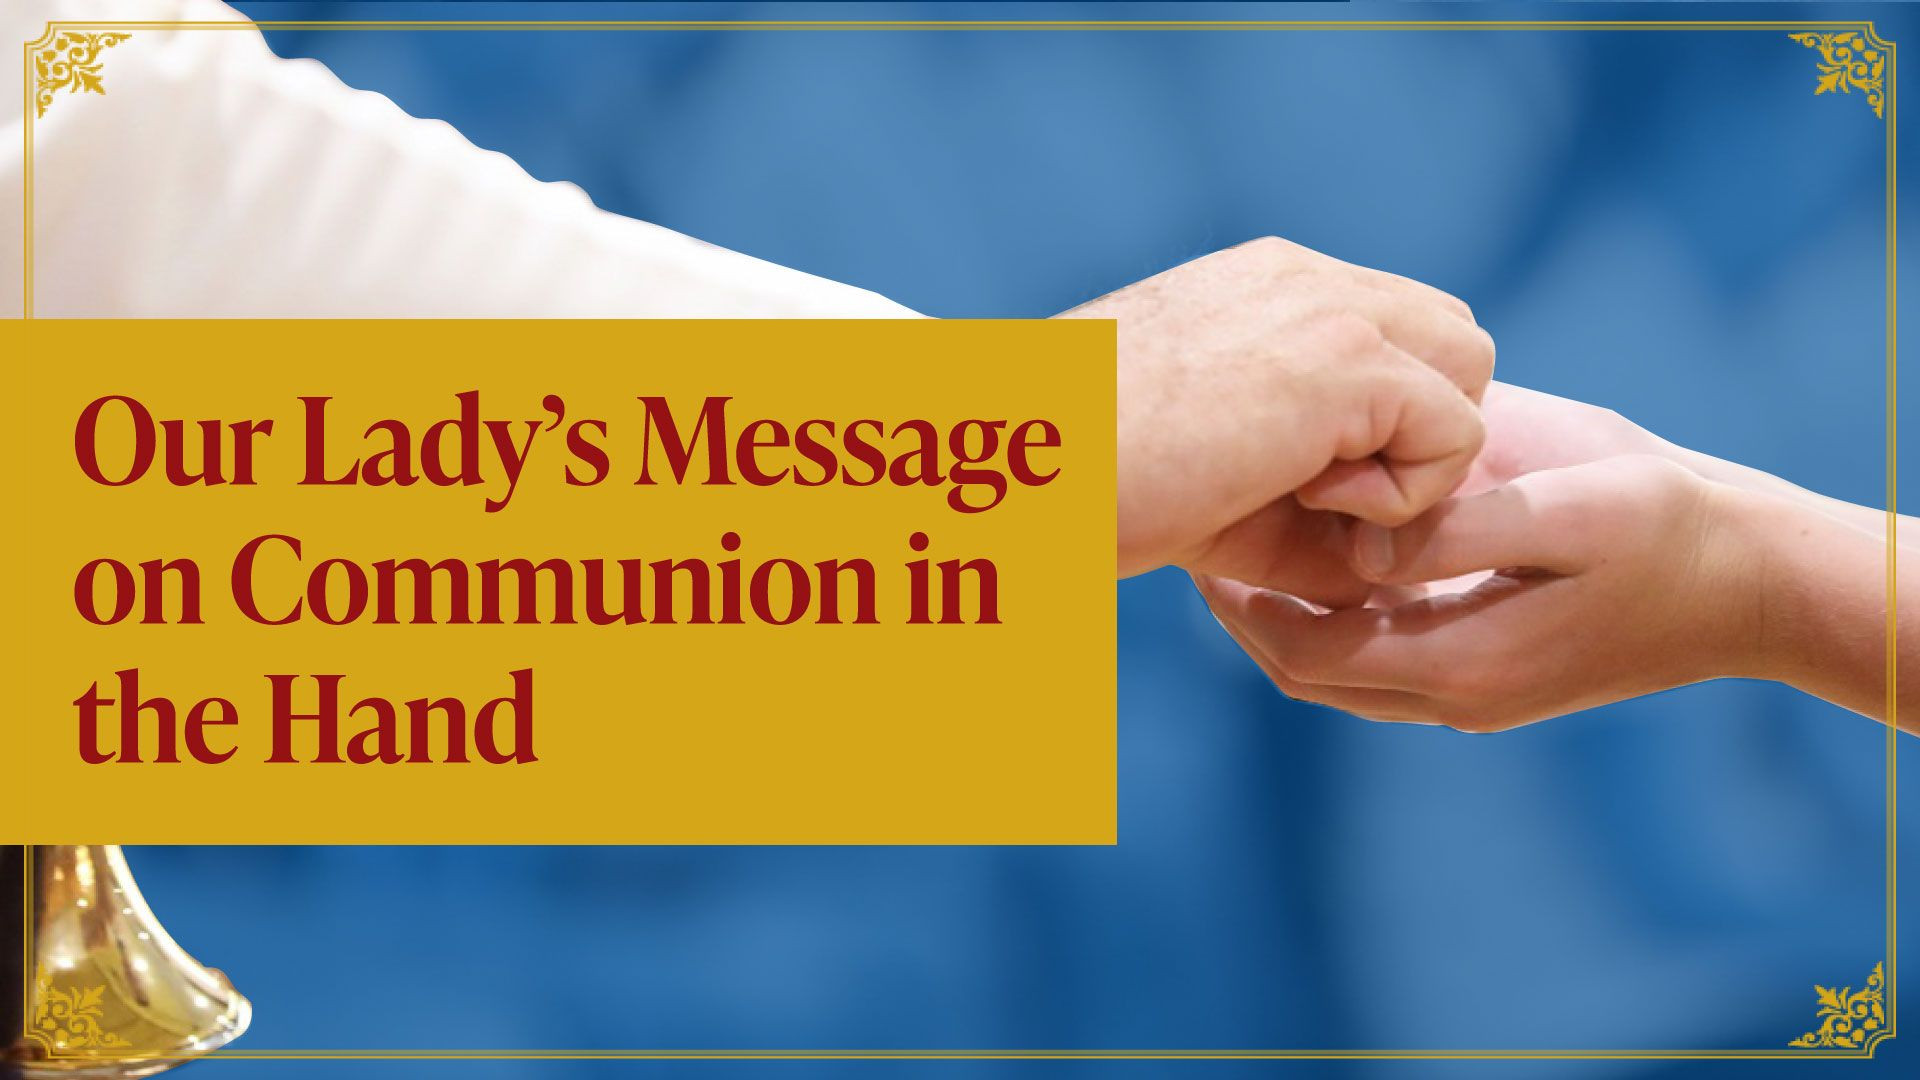 Our Lady's Message about Communion in the Hand